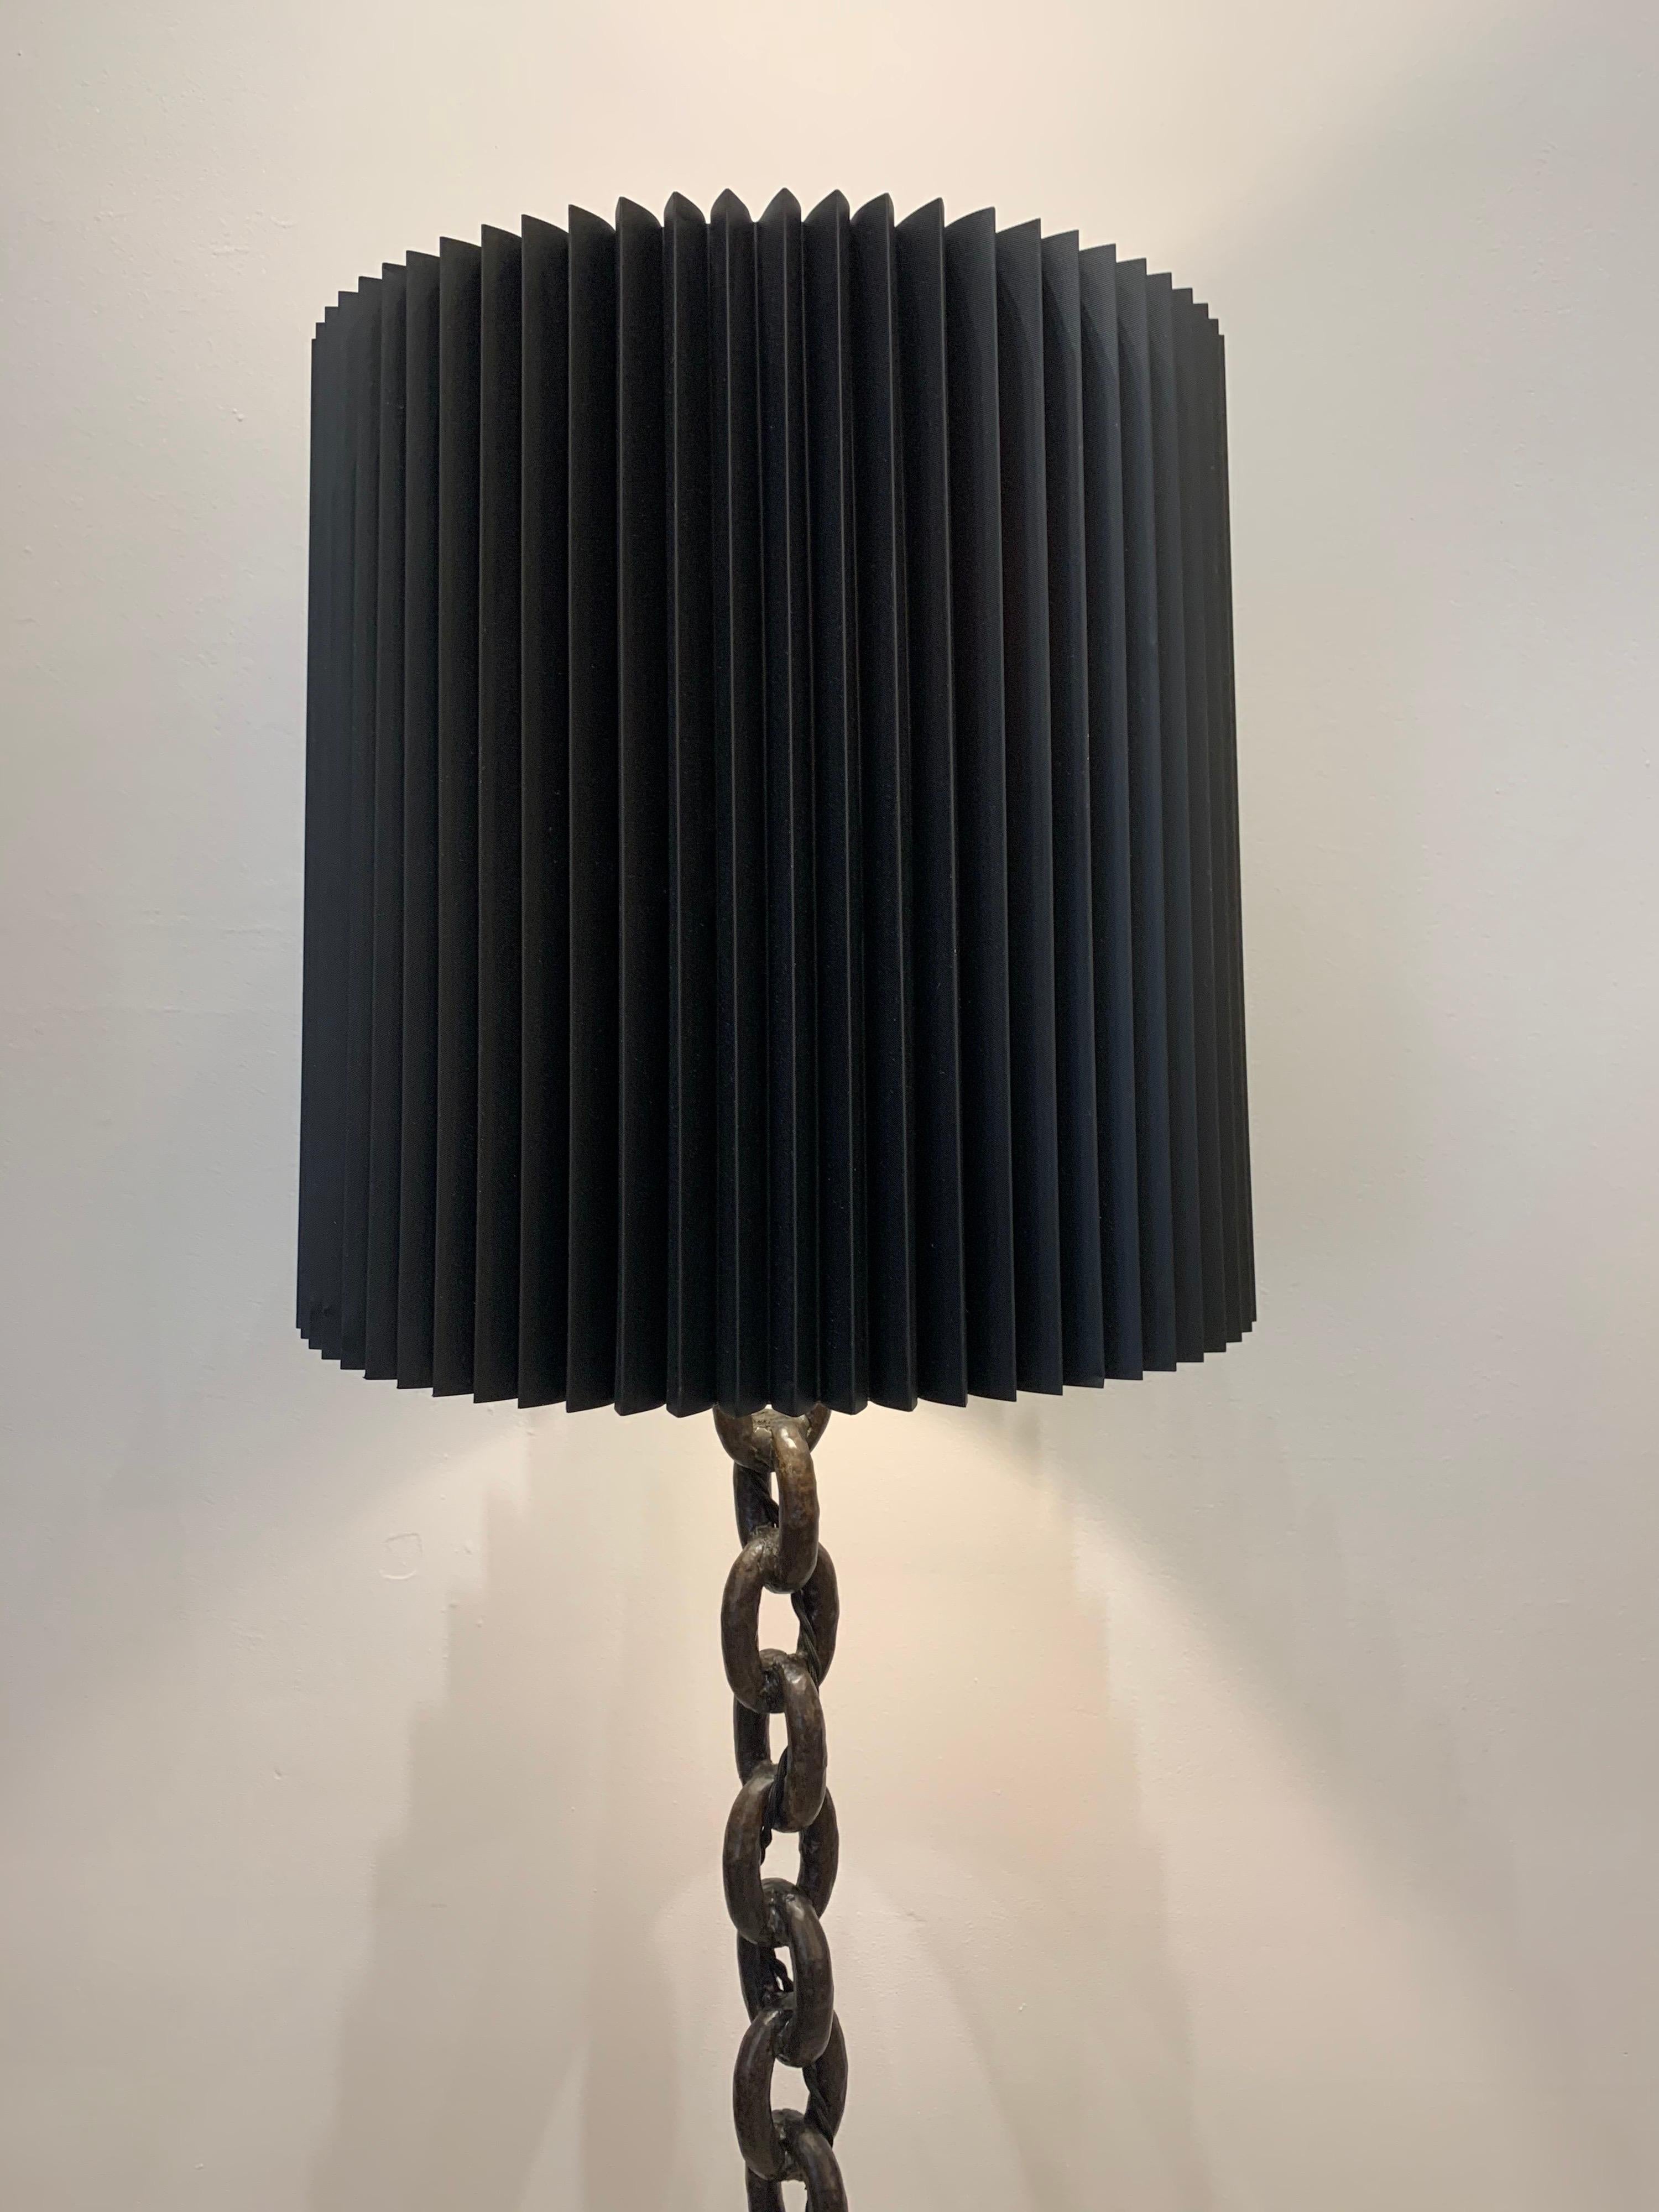 Late 20th Century Heavy Iron Chain Links Floor Lamp in the Style of Franz West